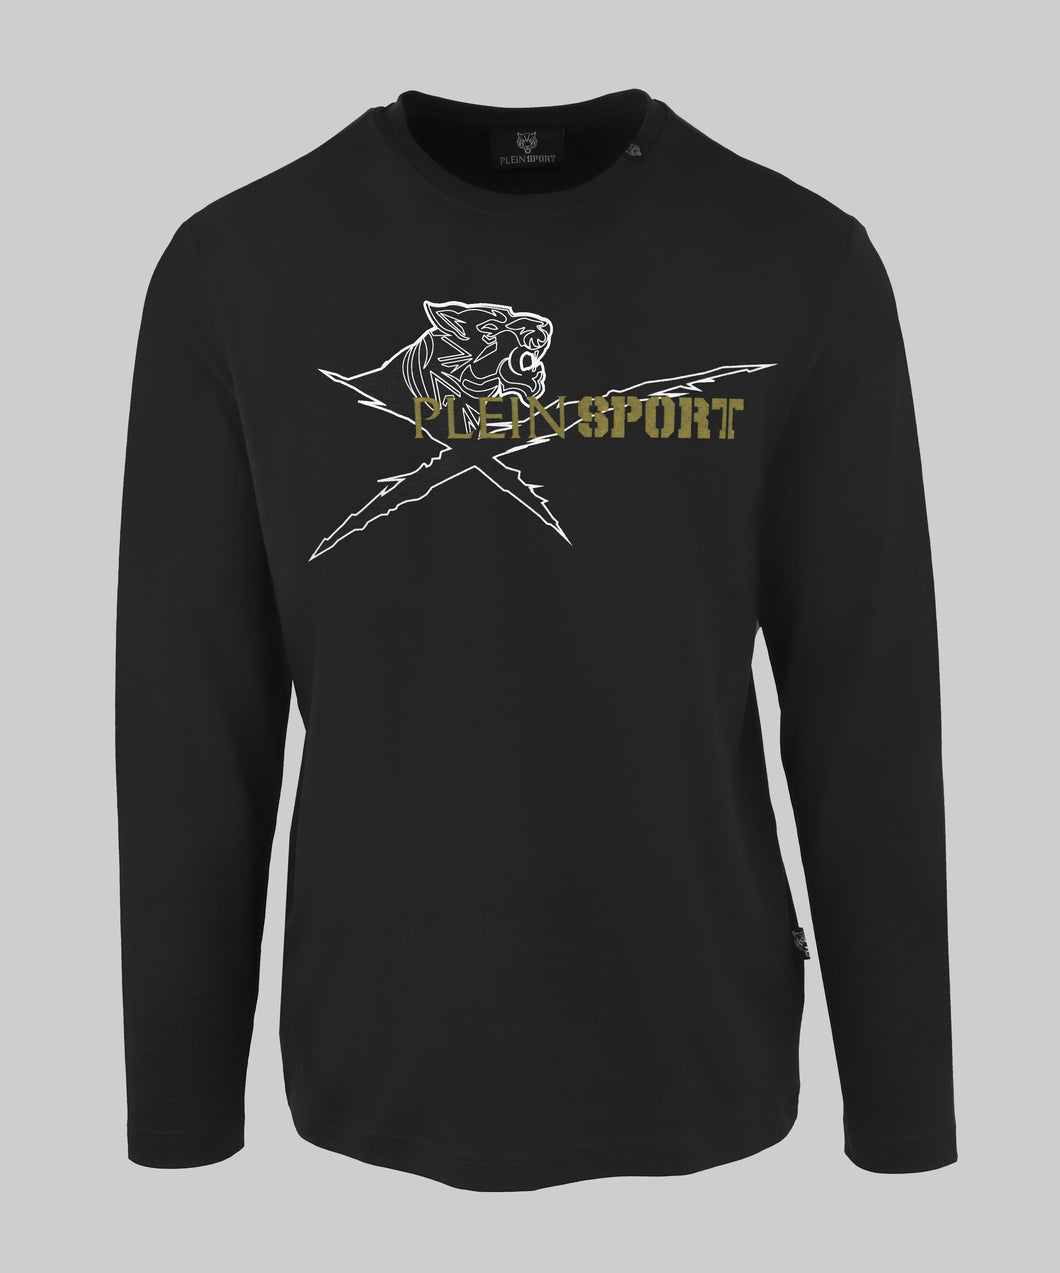 Plein Sport, Black  Long Sleeves T-Shirt with gold pattern on the chest